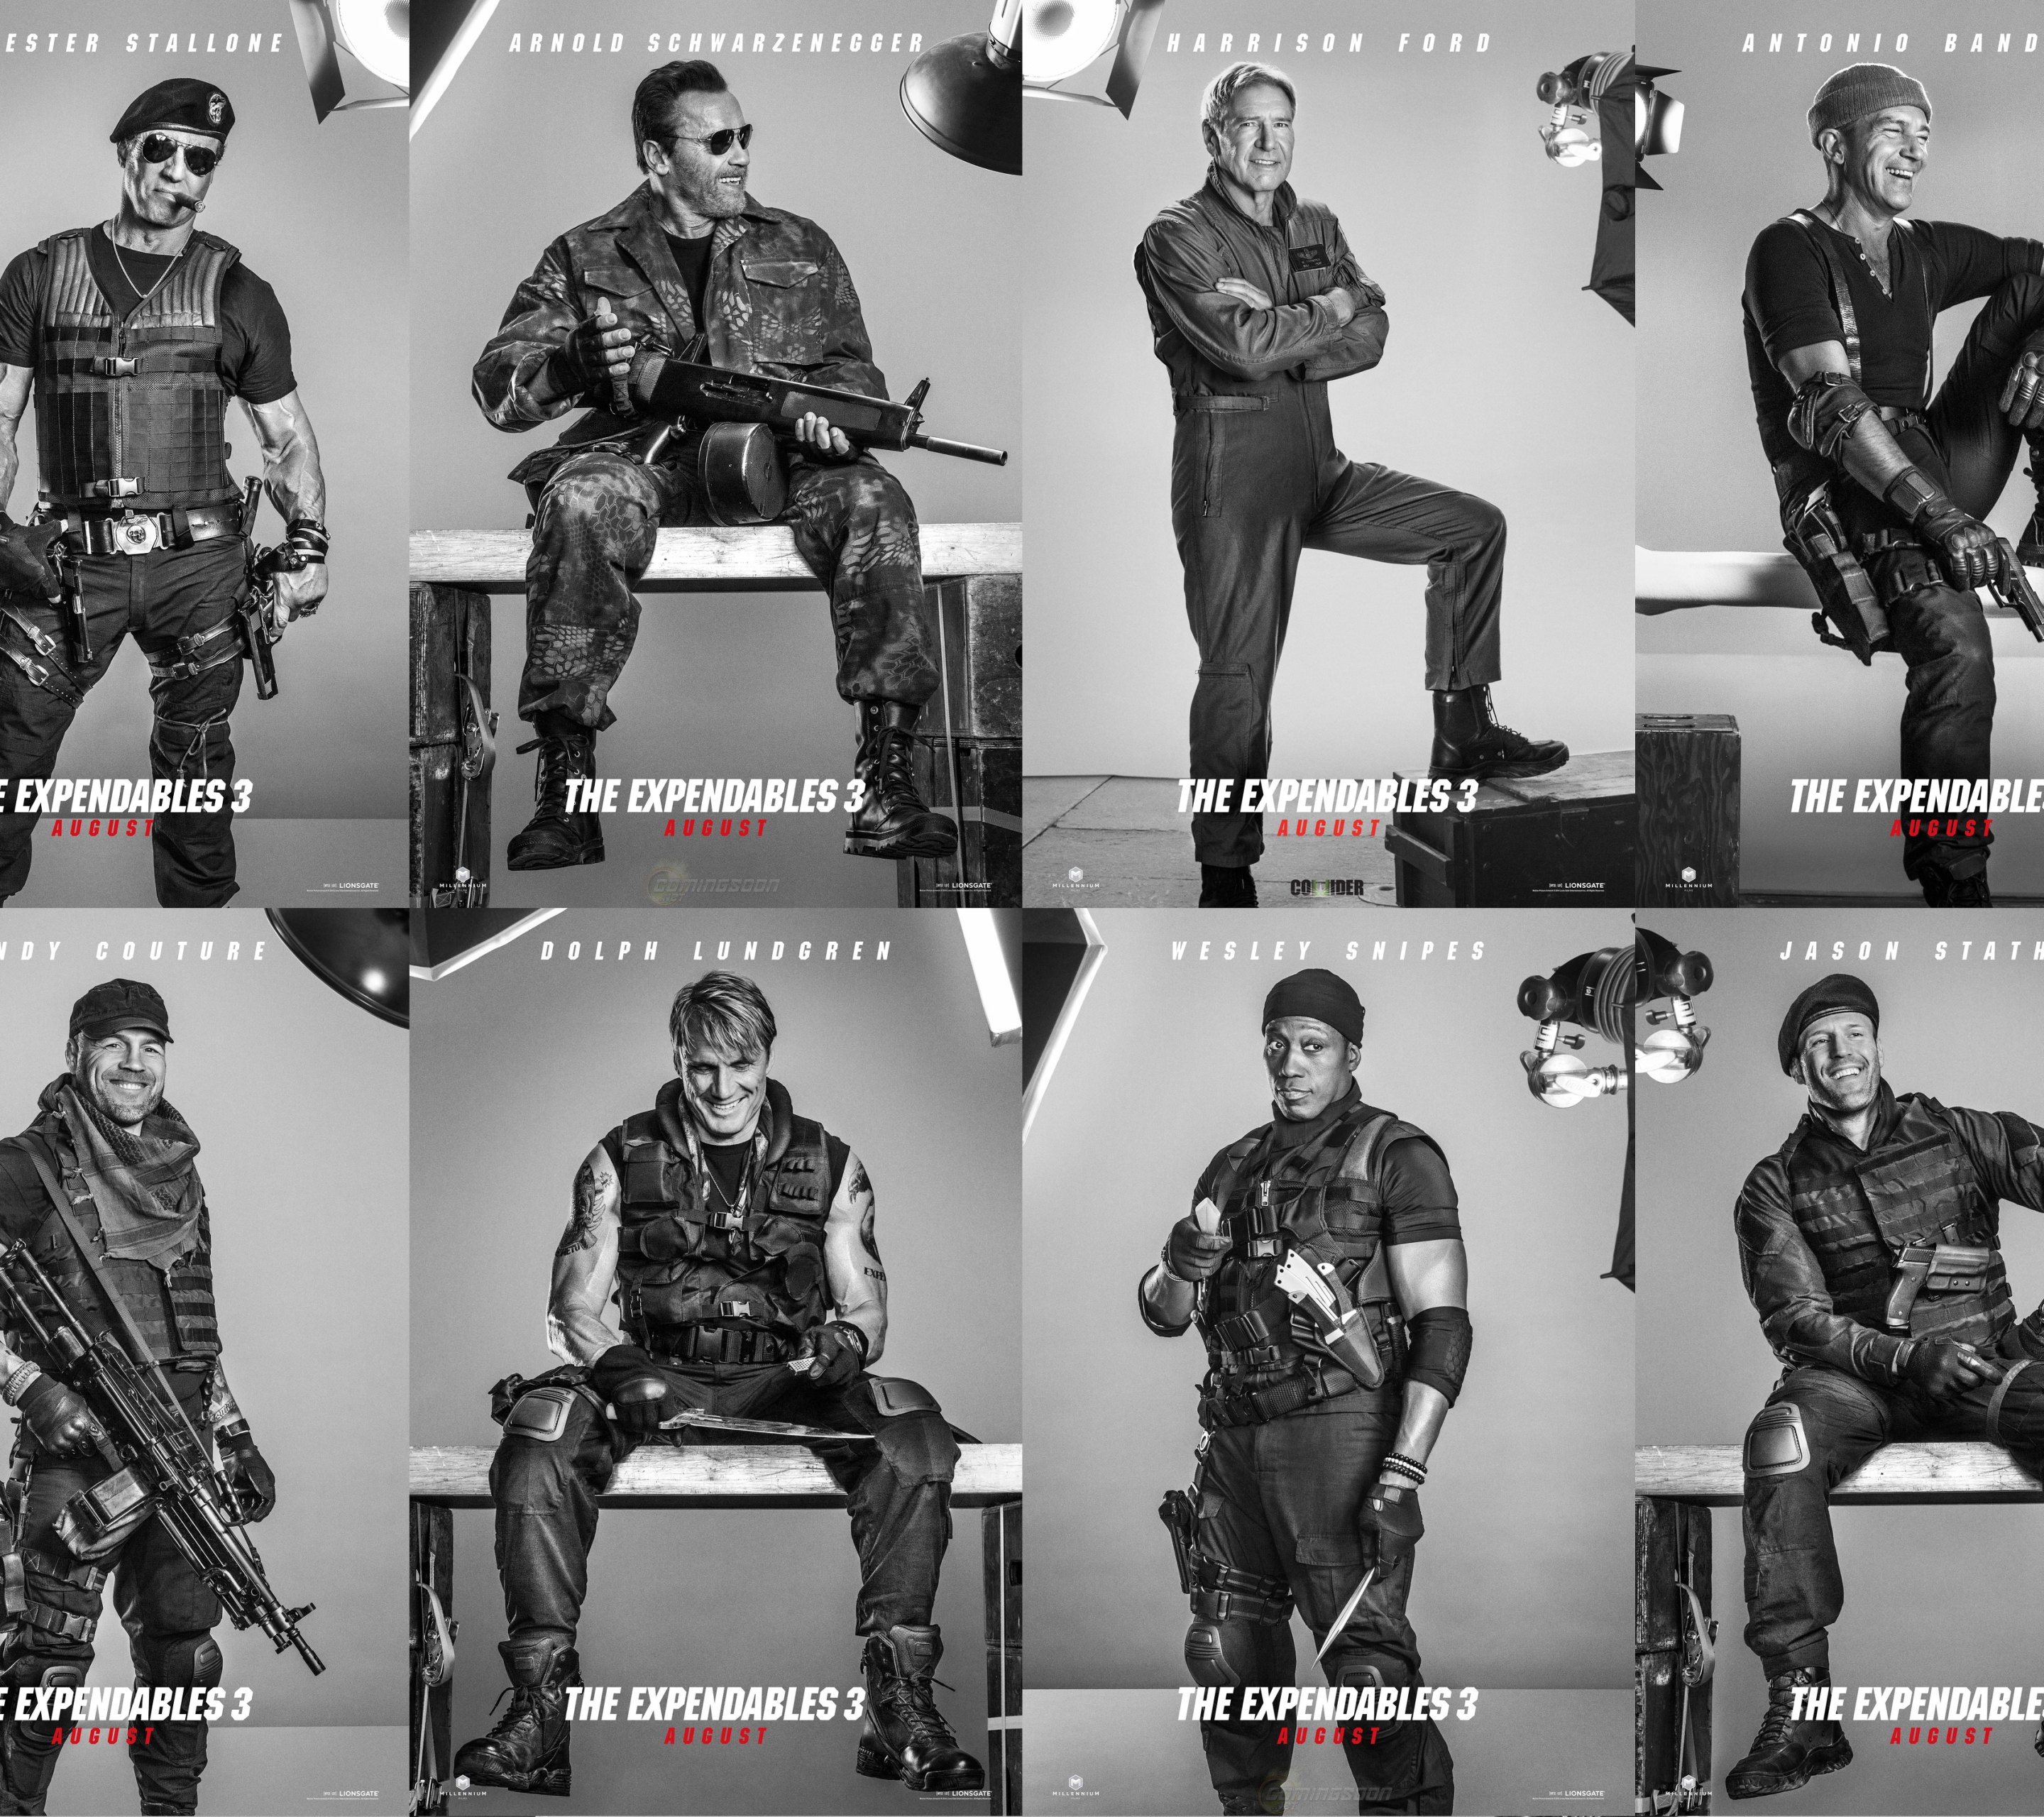 movie, the expendables 3, randy couture, sylvester stallone, arnold schwarzenegger, dolph lundgren, wesley snipes, harrison ford, jason statham, antonio banderas, barney ross, doc (the expendables), trench (the expendables), lee christmas, gunnar jensen, toll road, galgo (the expendables), max drummer, the expendables